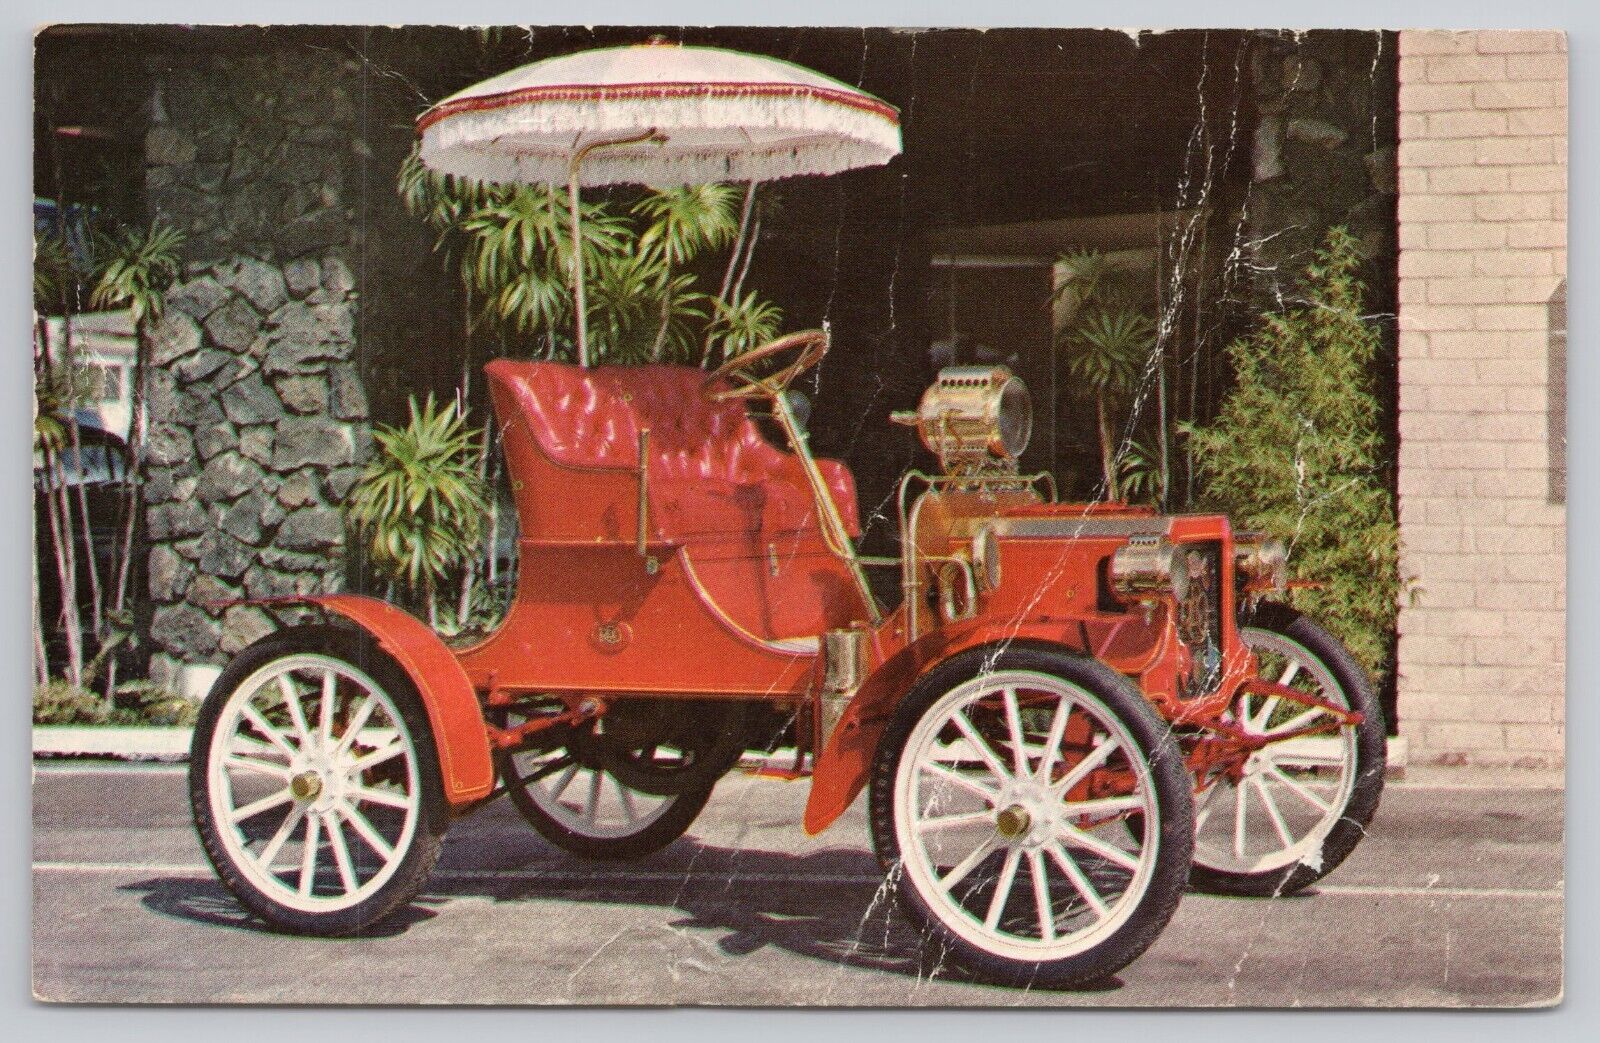 Bell California, 1904 Reo Runabout Bellwood Chevrolet Service Reminder Postcard